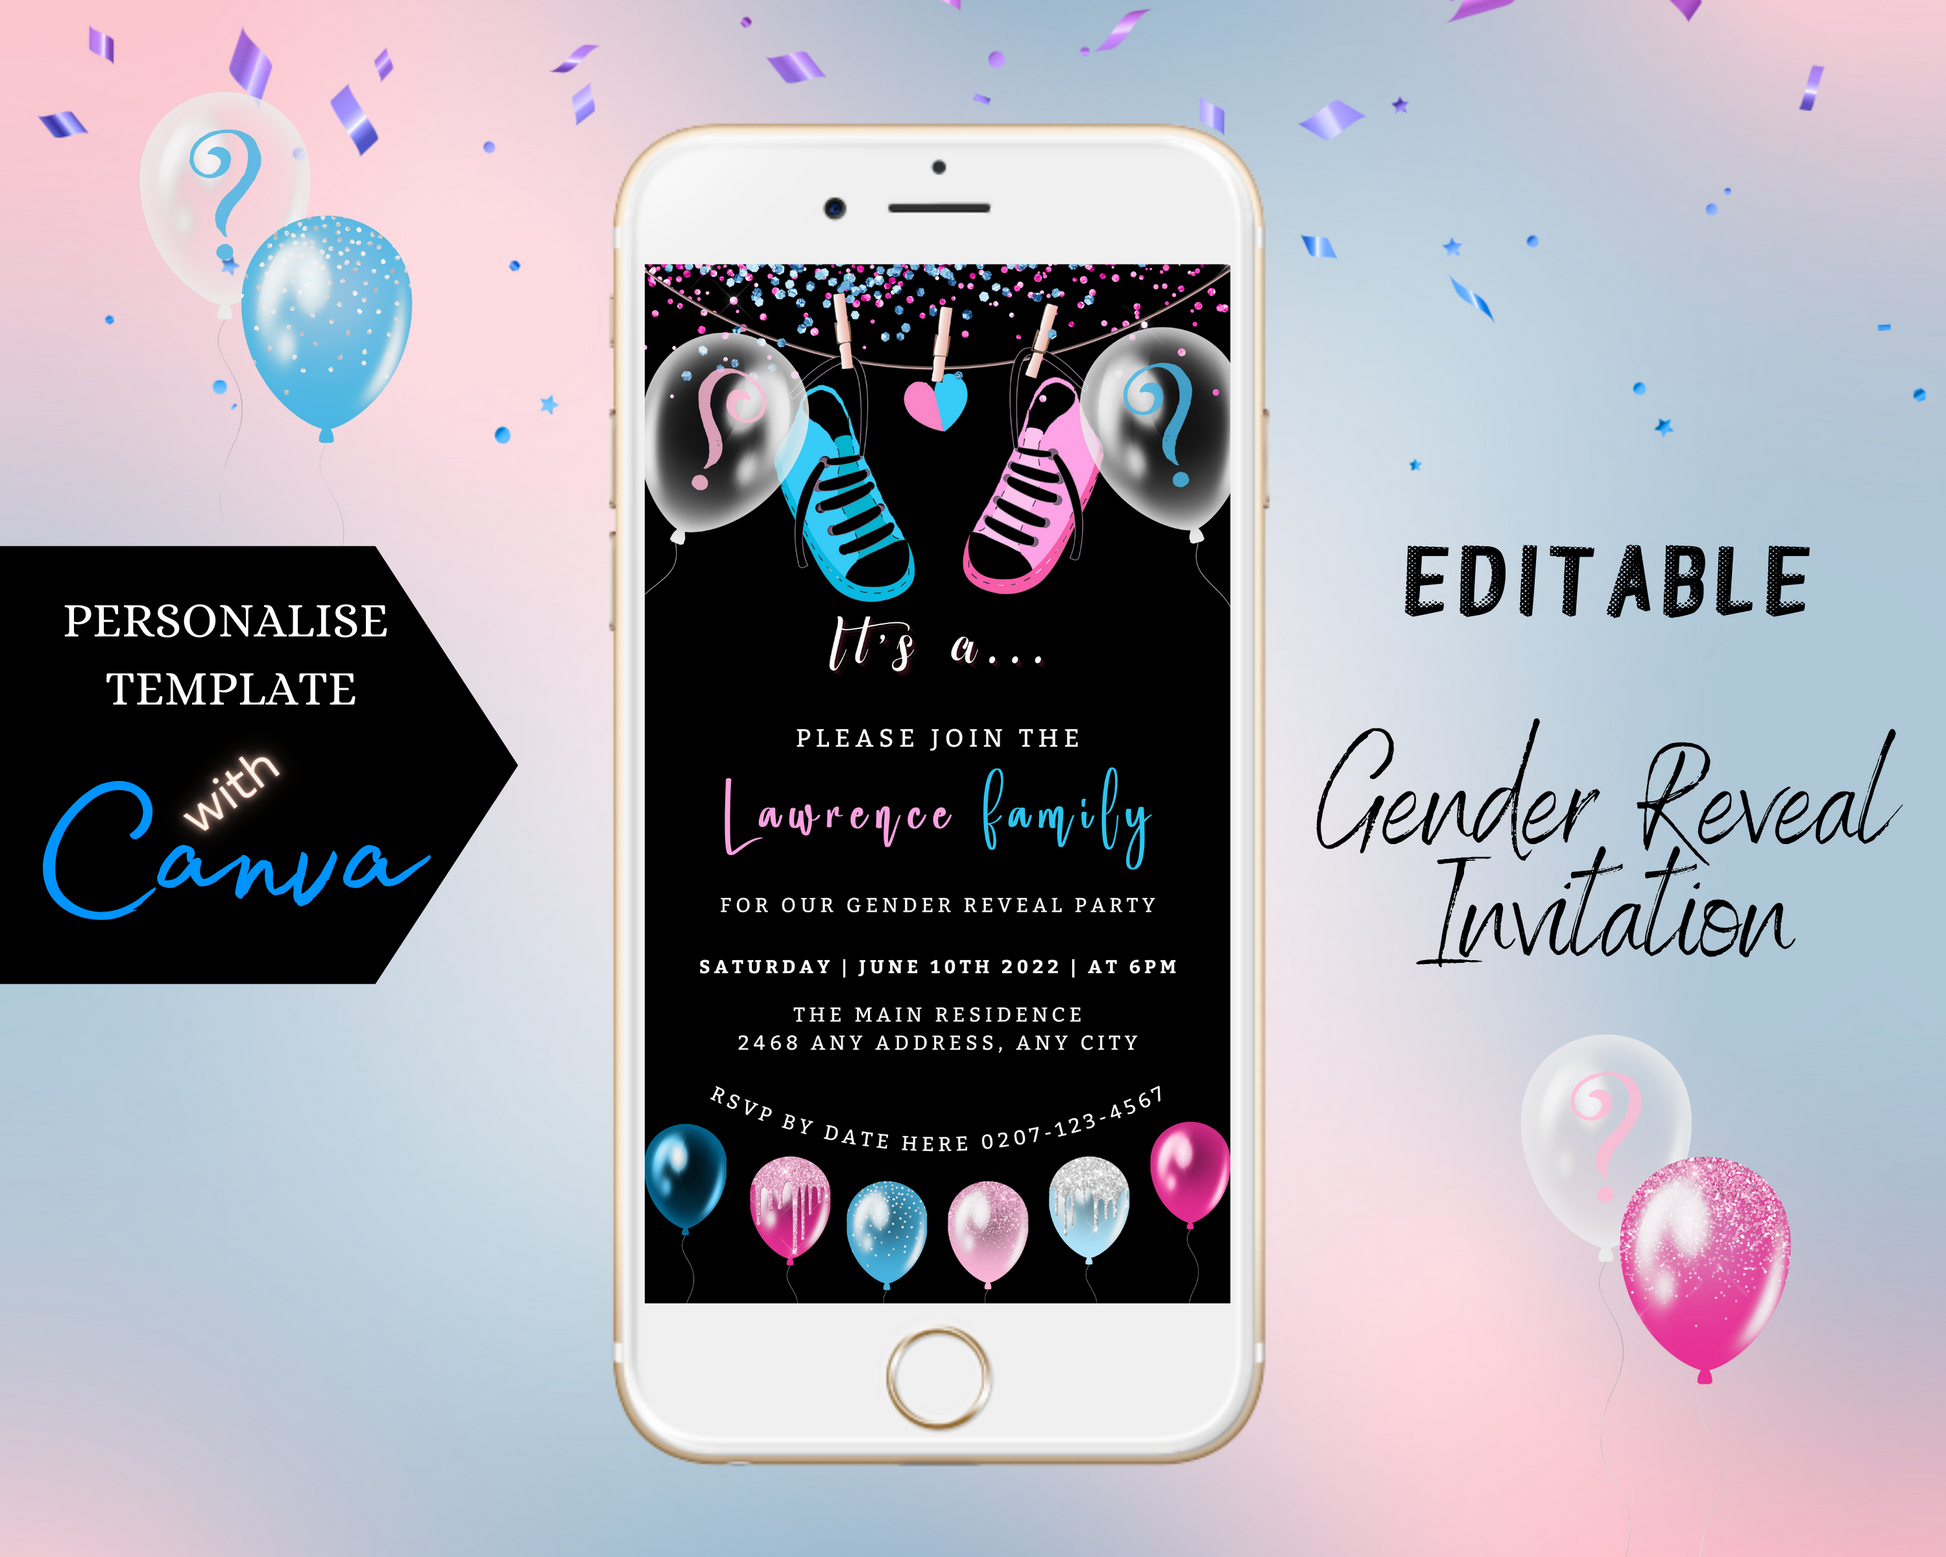 White smartphone displaying customizable digital gender reveal invitation featuring black, blue, and pink baby shoes with balloons and confetti.